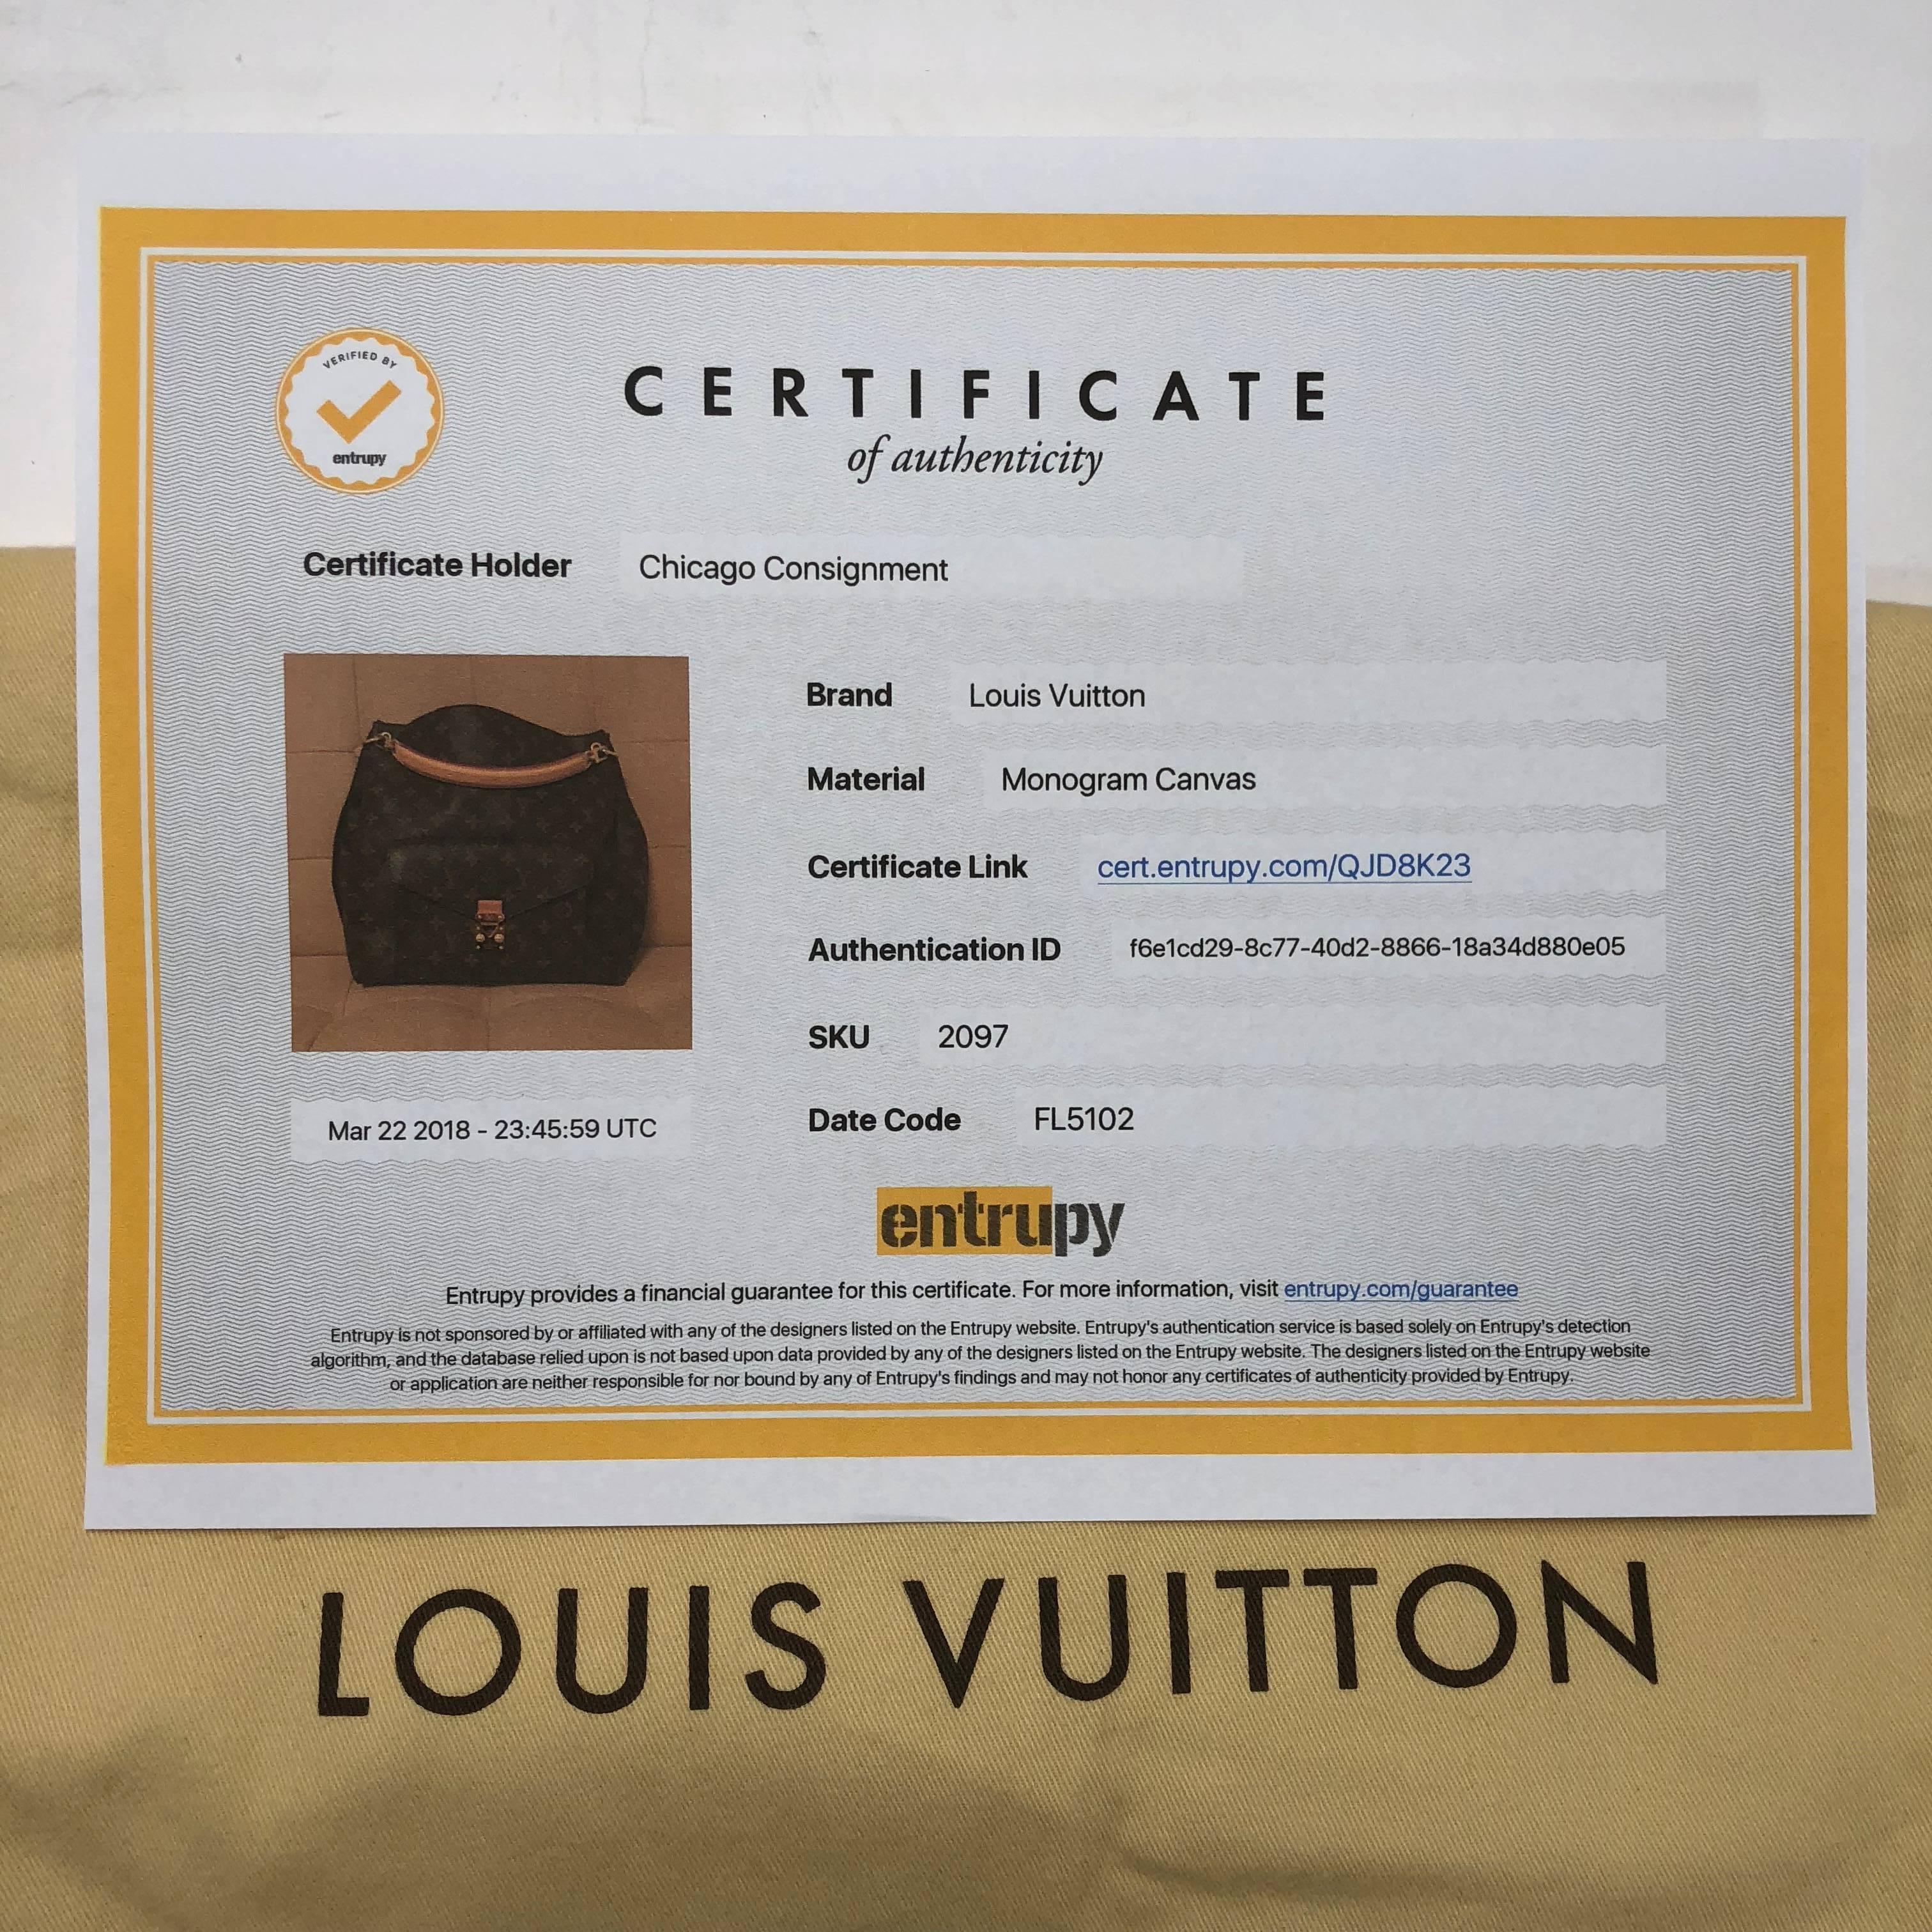 MODEL - Louis Vuitton Monogram Metis Two Way

CONDITION - Looks almost NEW!  Light vachetta with no watermarks, light smudging on pocket tab, no dryness and no cracking.  Bright and shiny hardware with no tarnishing or chipping.  No rips, holes,